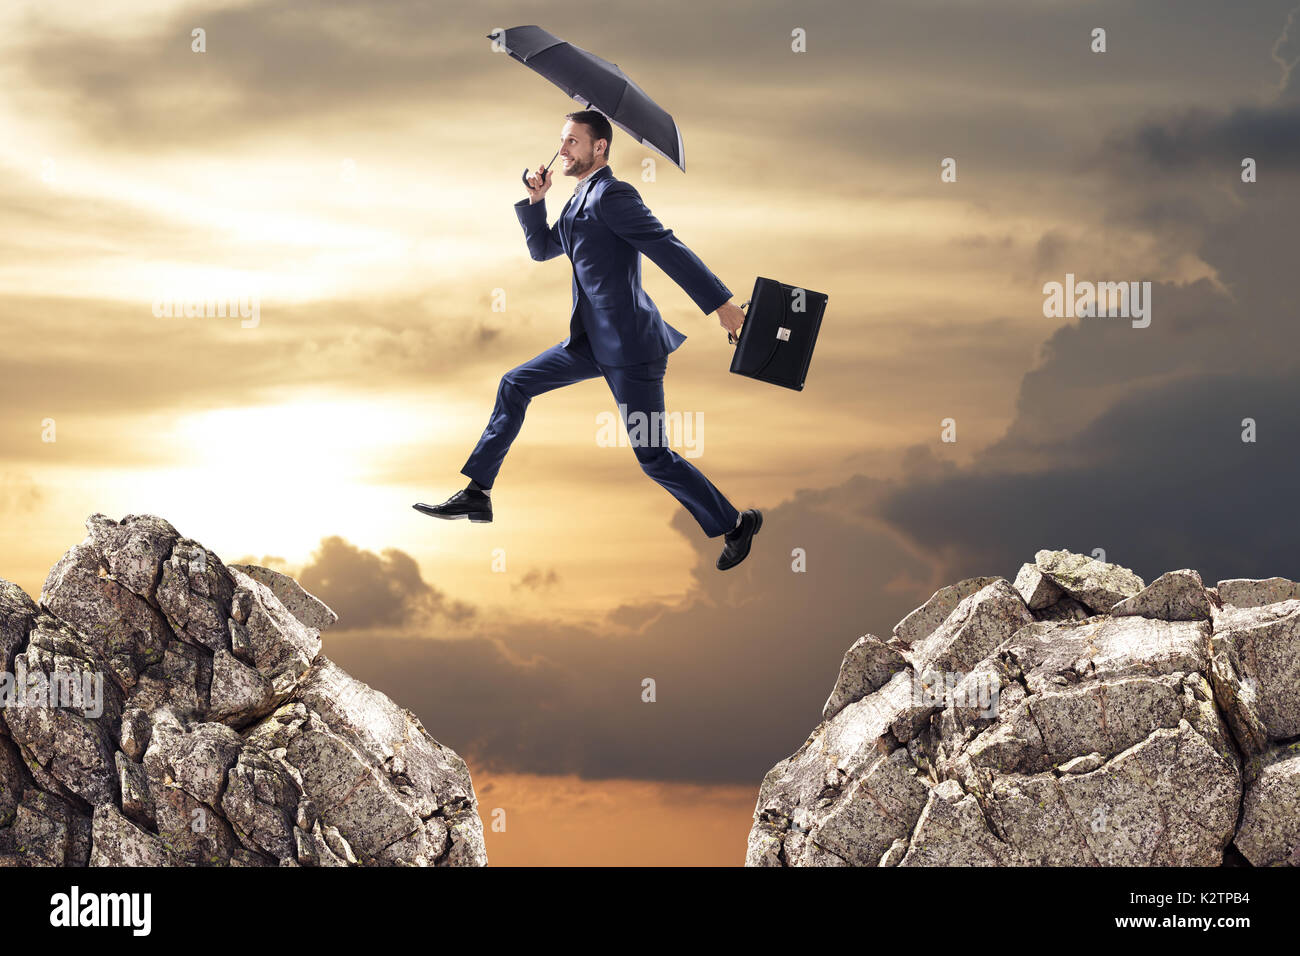 Business man jumping over a cliff with umbrella. Stock Photo